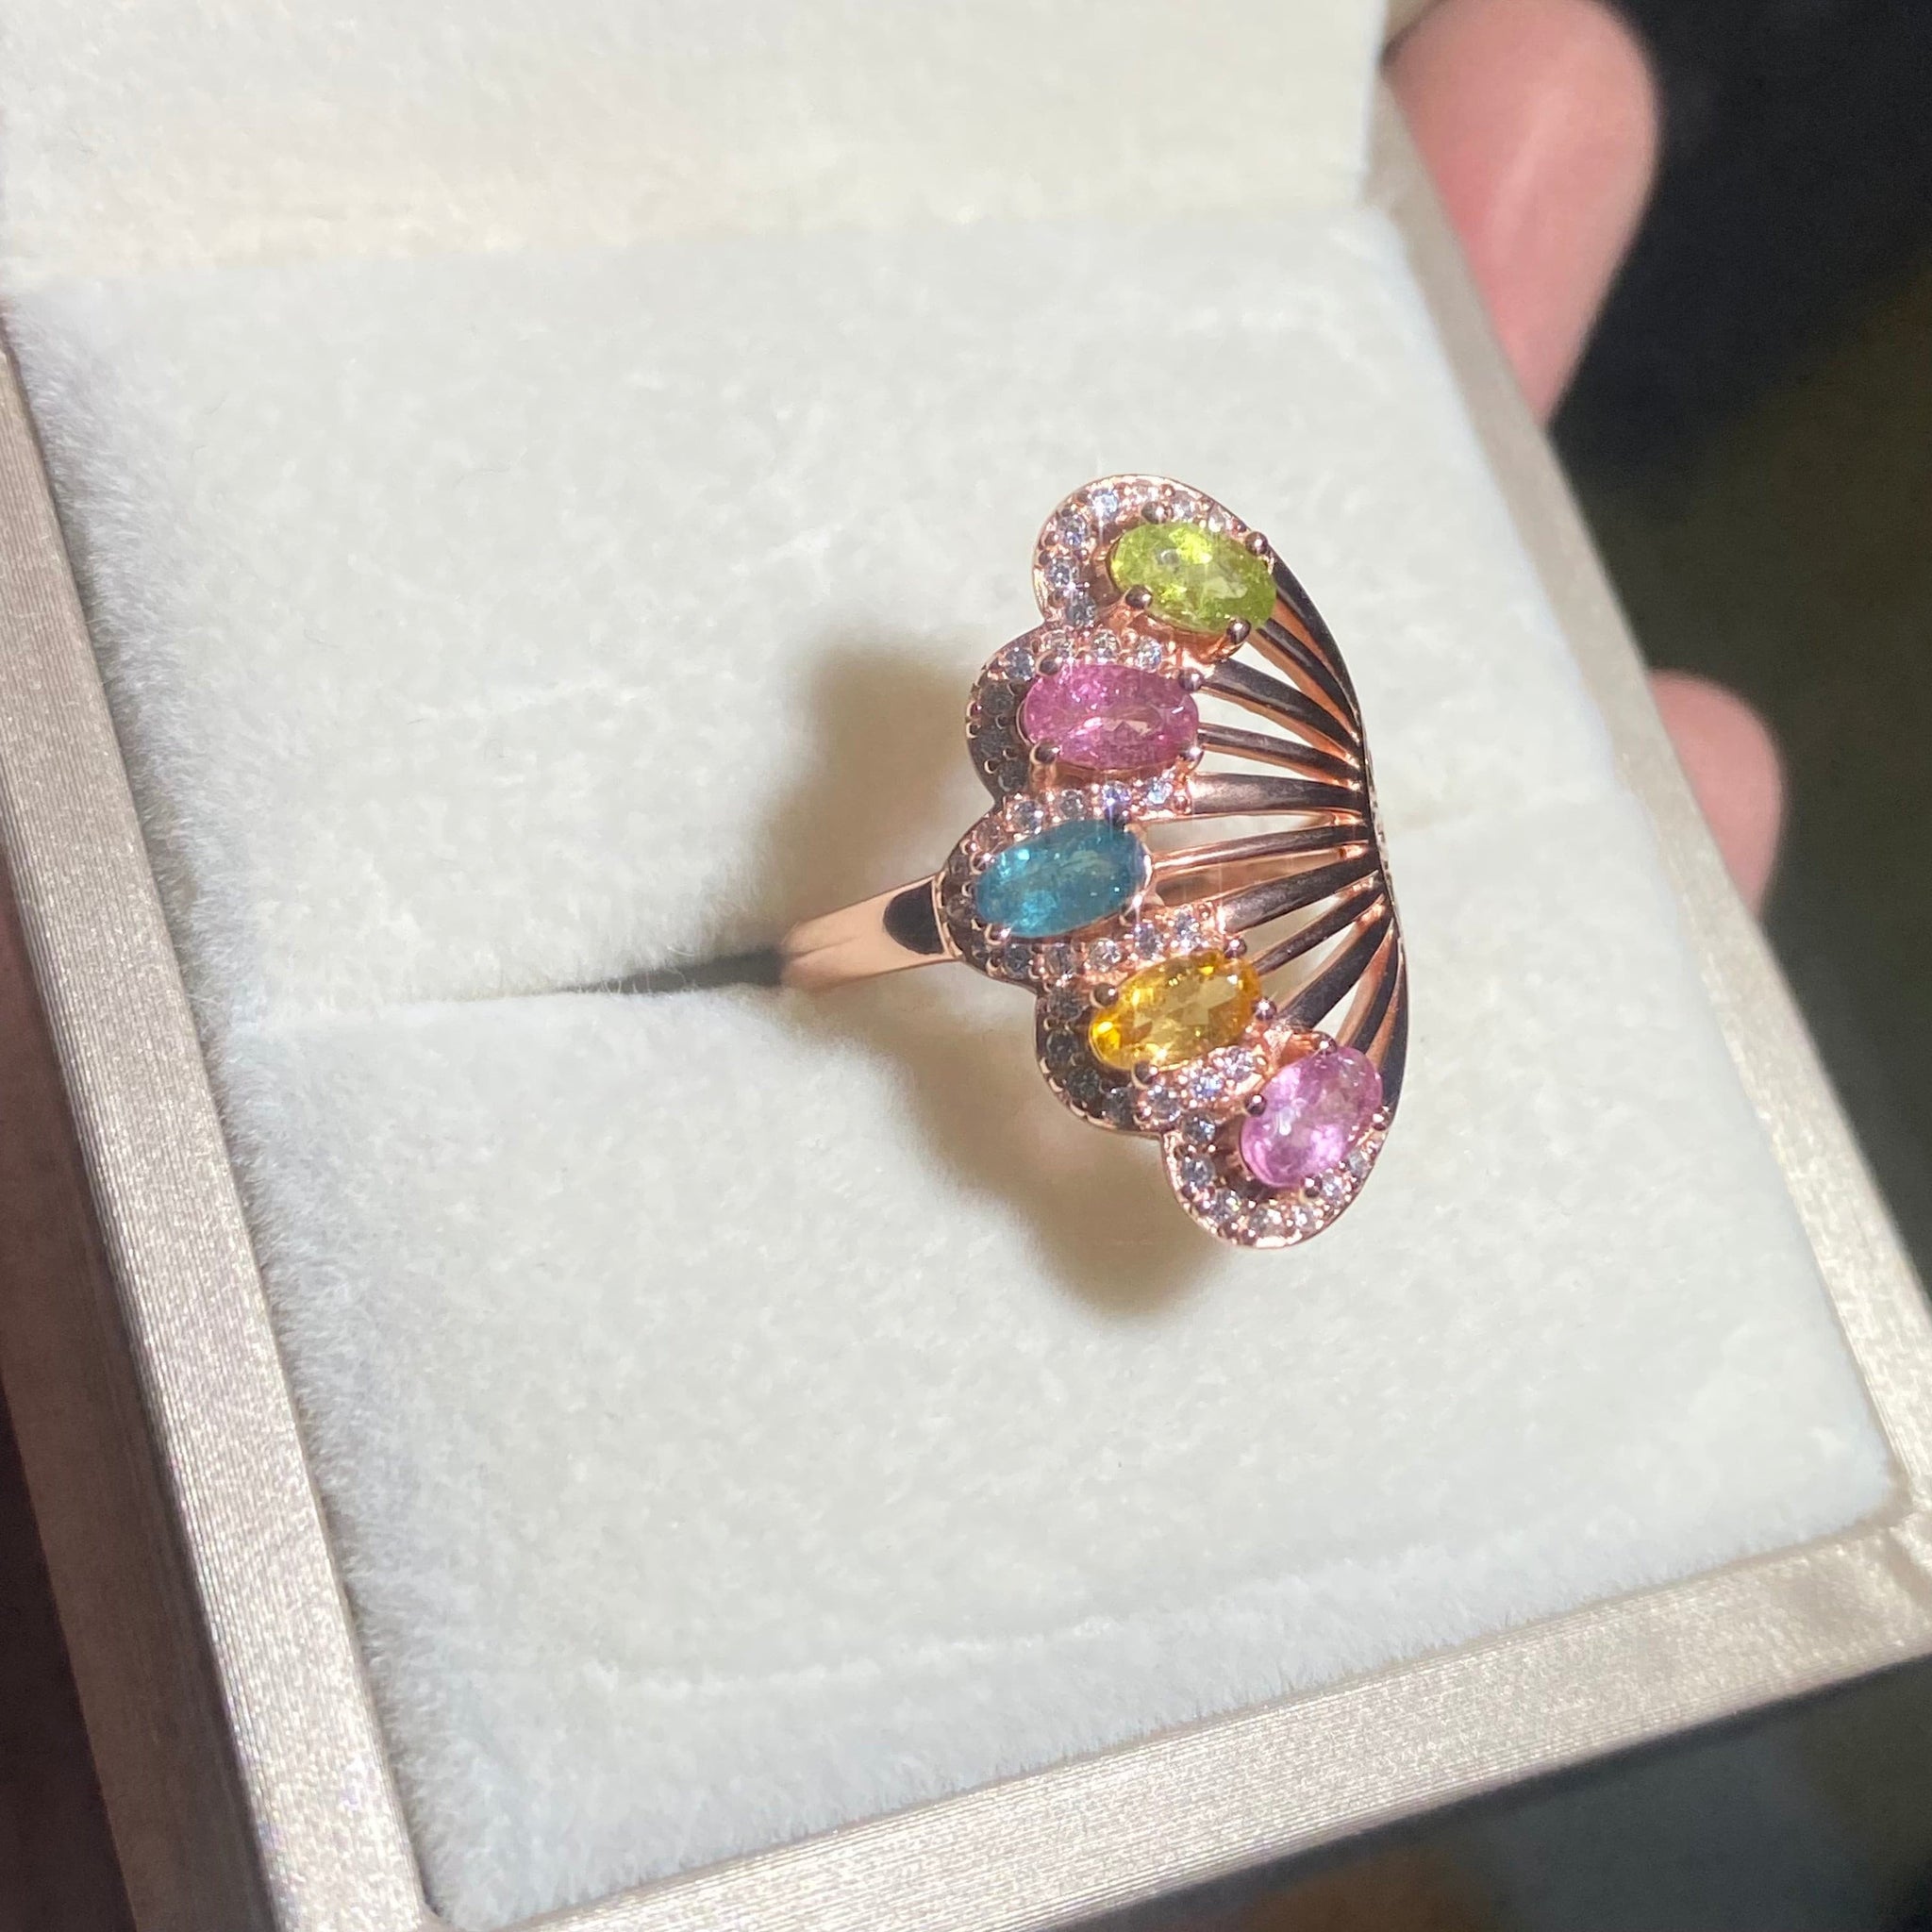 S925 Sterling Silver Natural Tourmaline Peacock Ring.